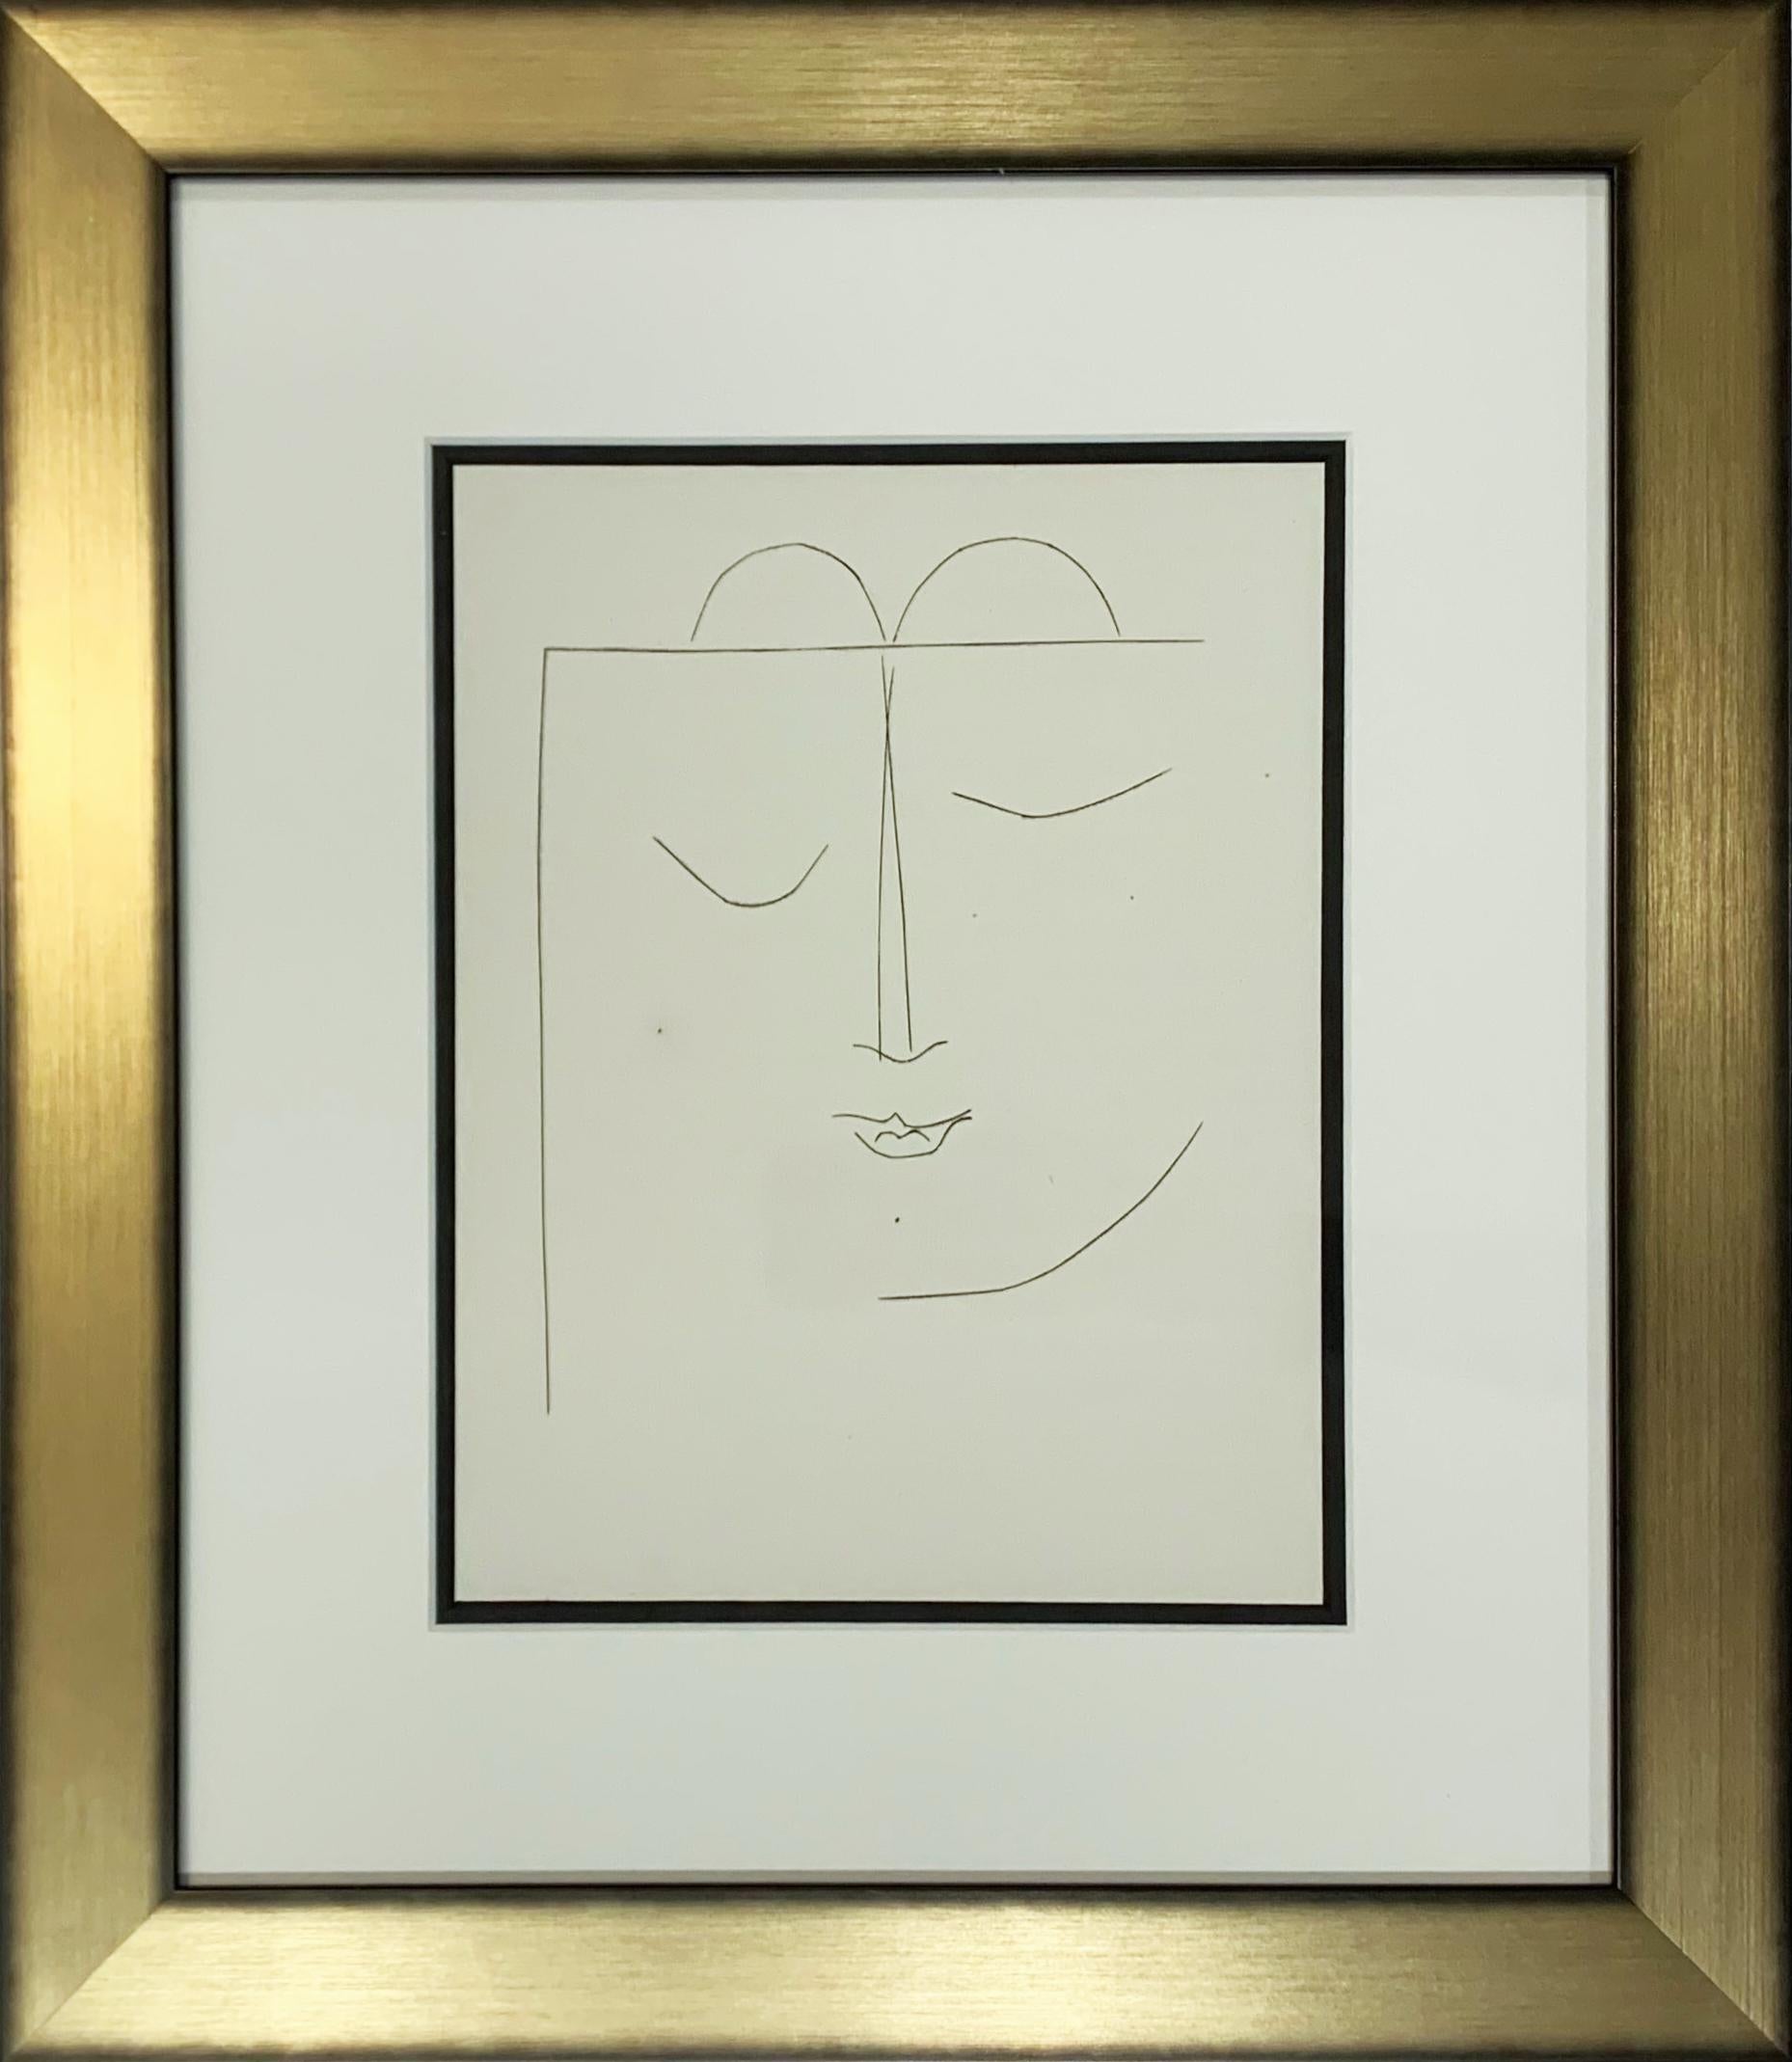 Pablo Picasso Portrait Print - Carmen Half-Square Head of a Woman with Closed Eyes and Full Lips (Plate XXVII)